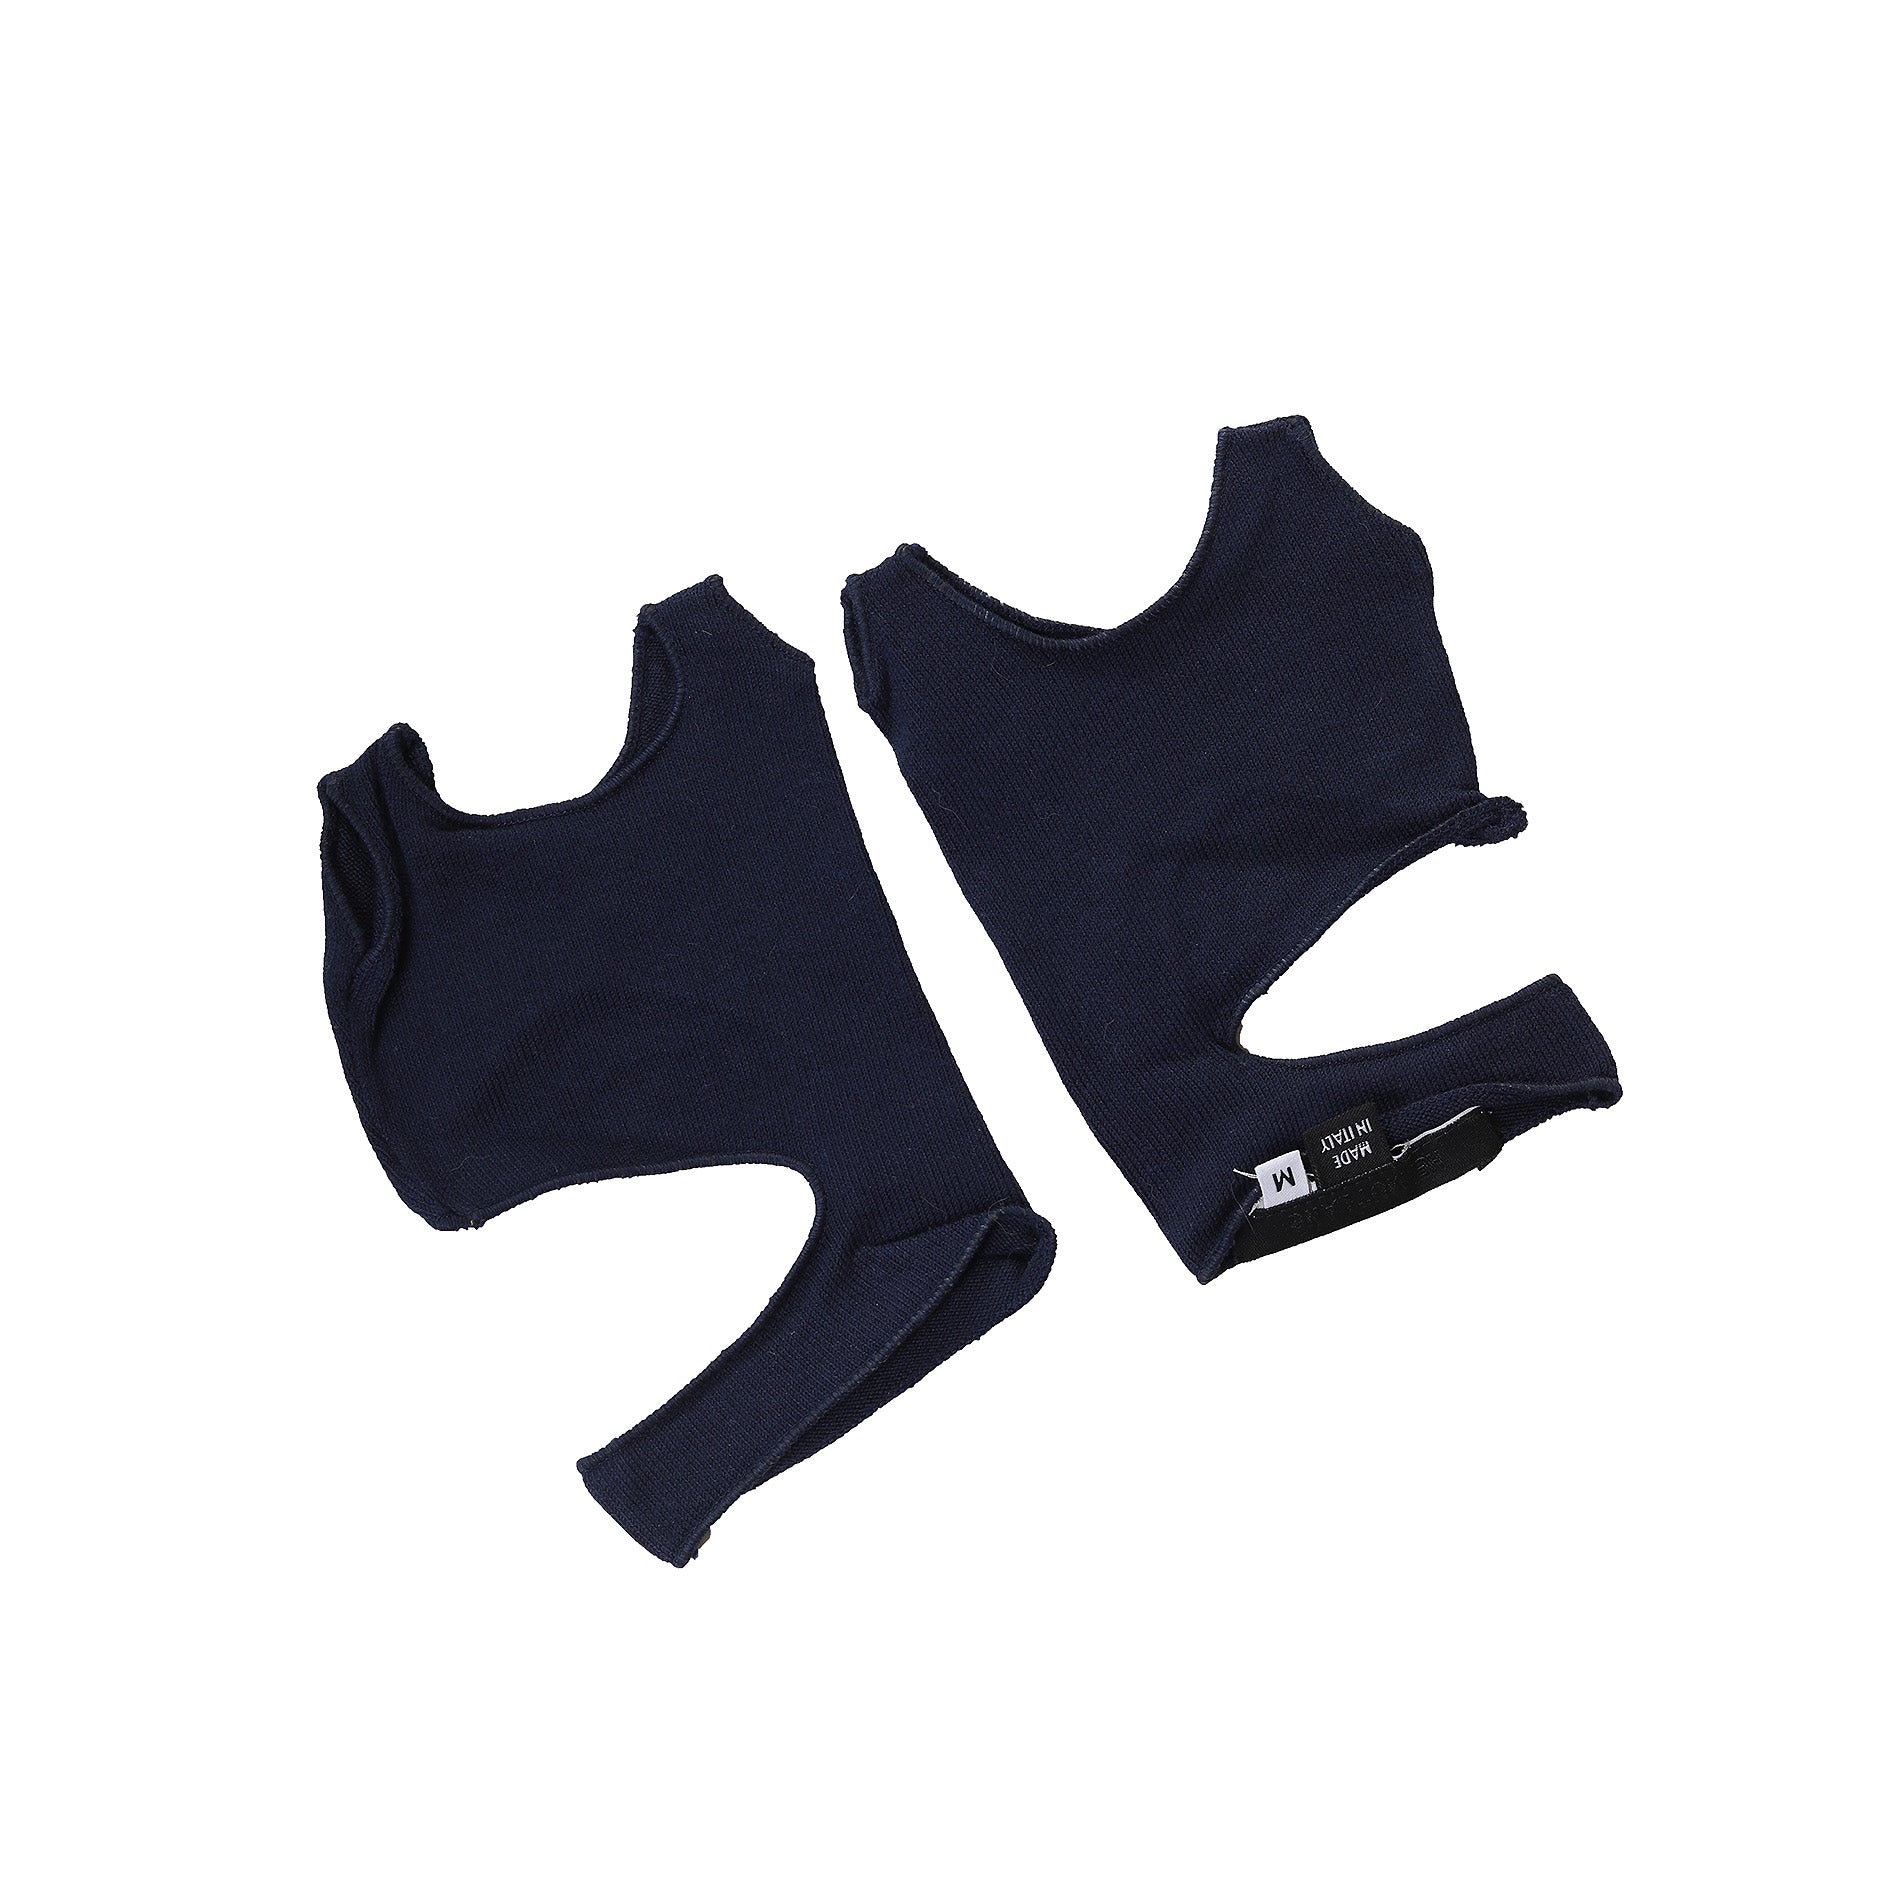 Helmut Lang SS04 Navy Cut Out Gloves